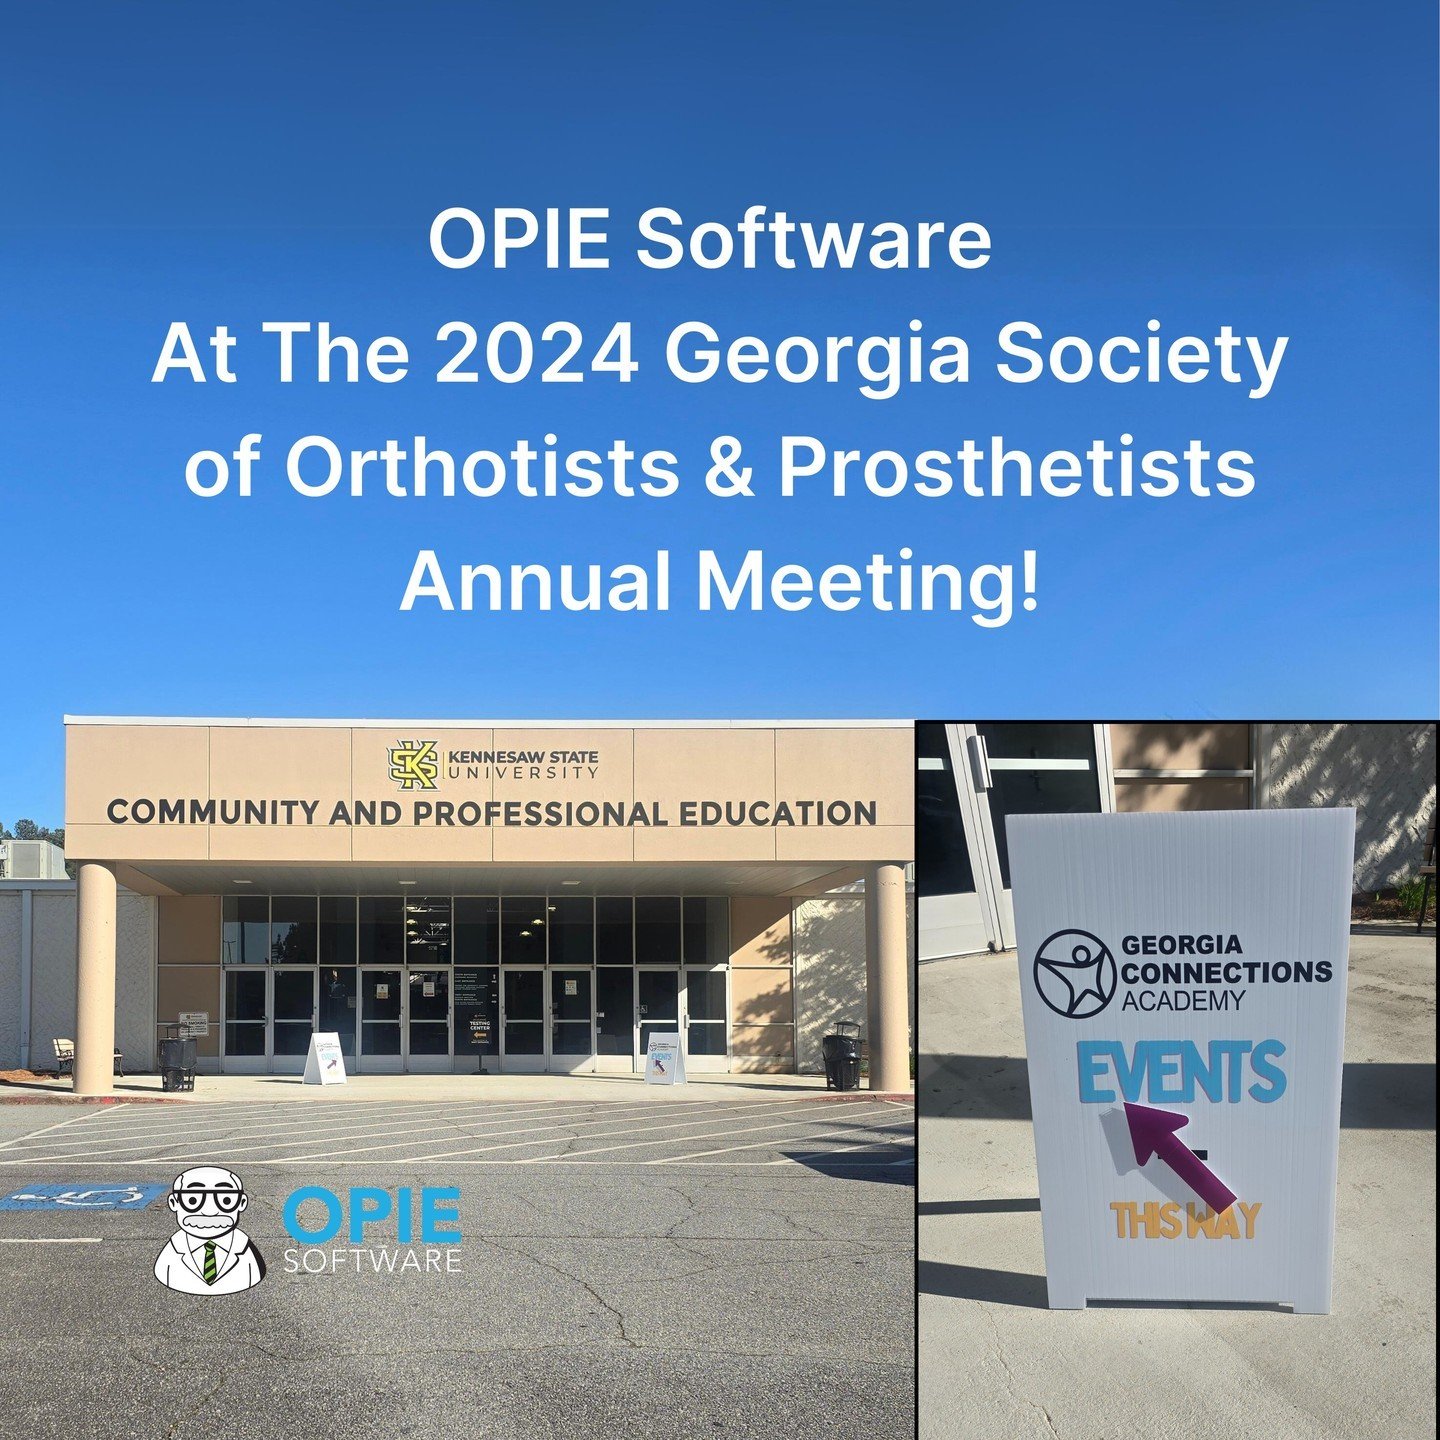 Last week, Susanne Kasza attended the 2024 Georgia Society of Orthotists &amp; Prosthetists Annual Meeting at Kennesaw State University. We were thrilled to witness their state-of-the-art O&amp;P educational program in action! What a fantastic recept